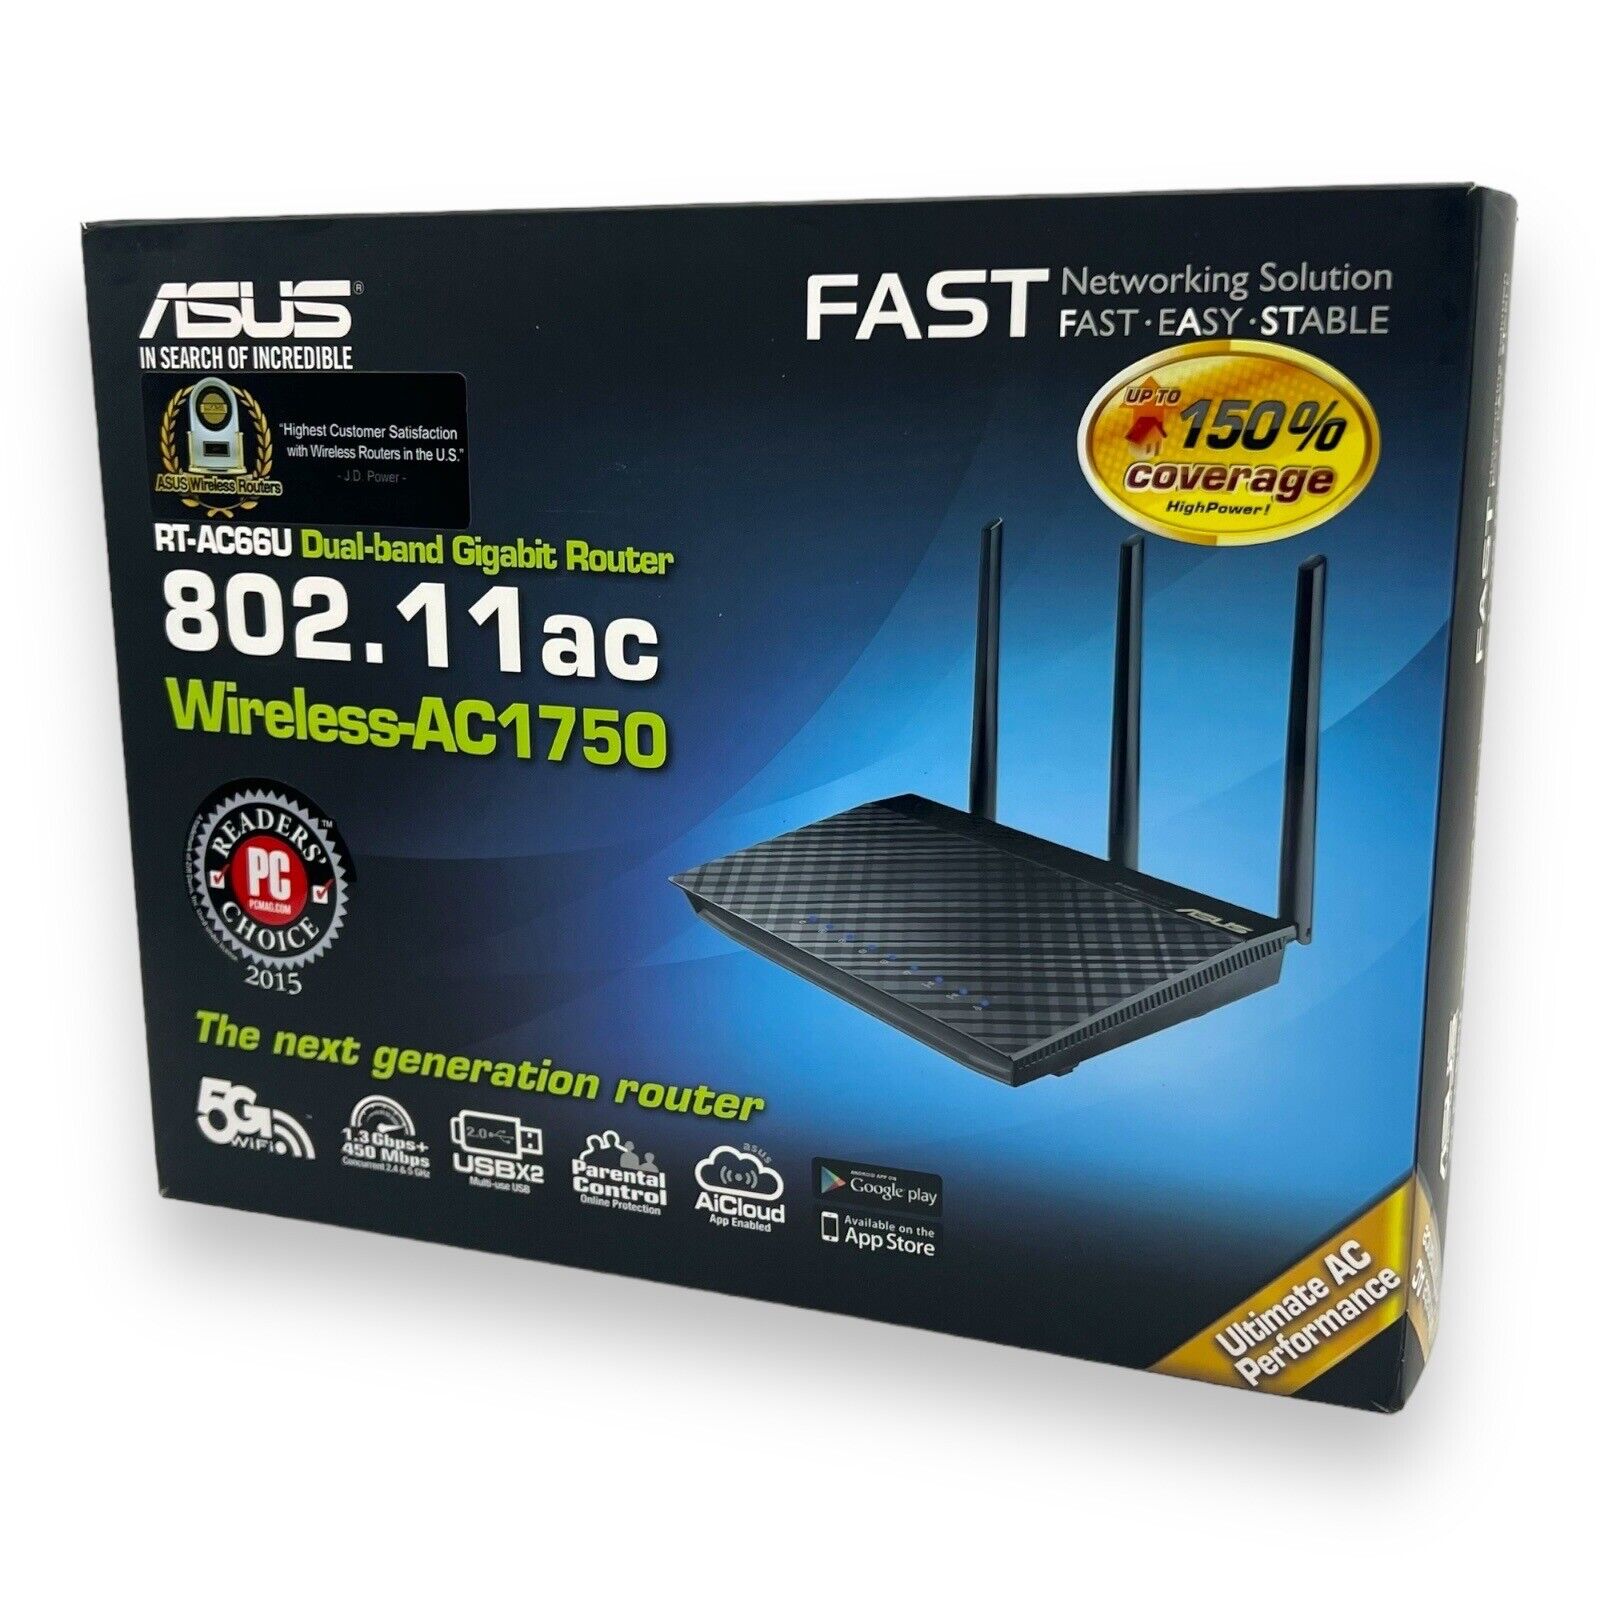 ASUS RT-AC66U 802.11ac Dual-Band Wireless AC1750 Gigabit Router Excellent